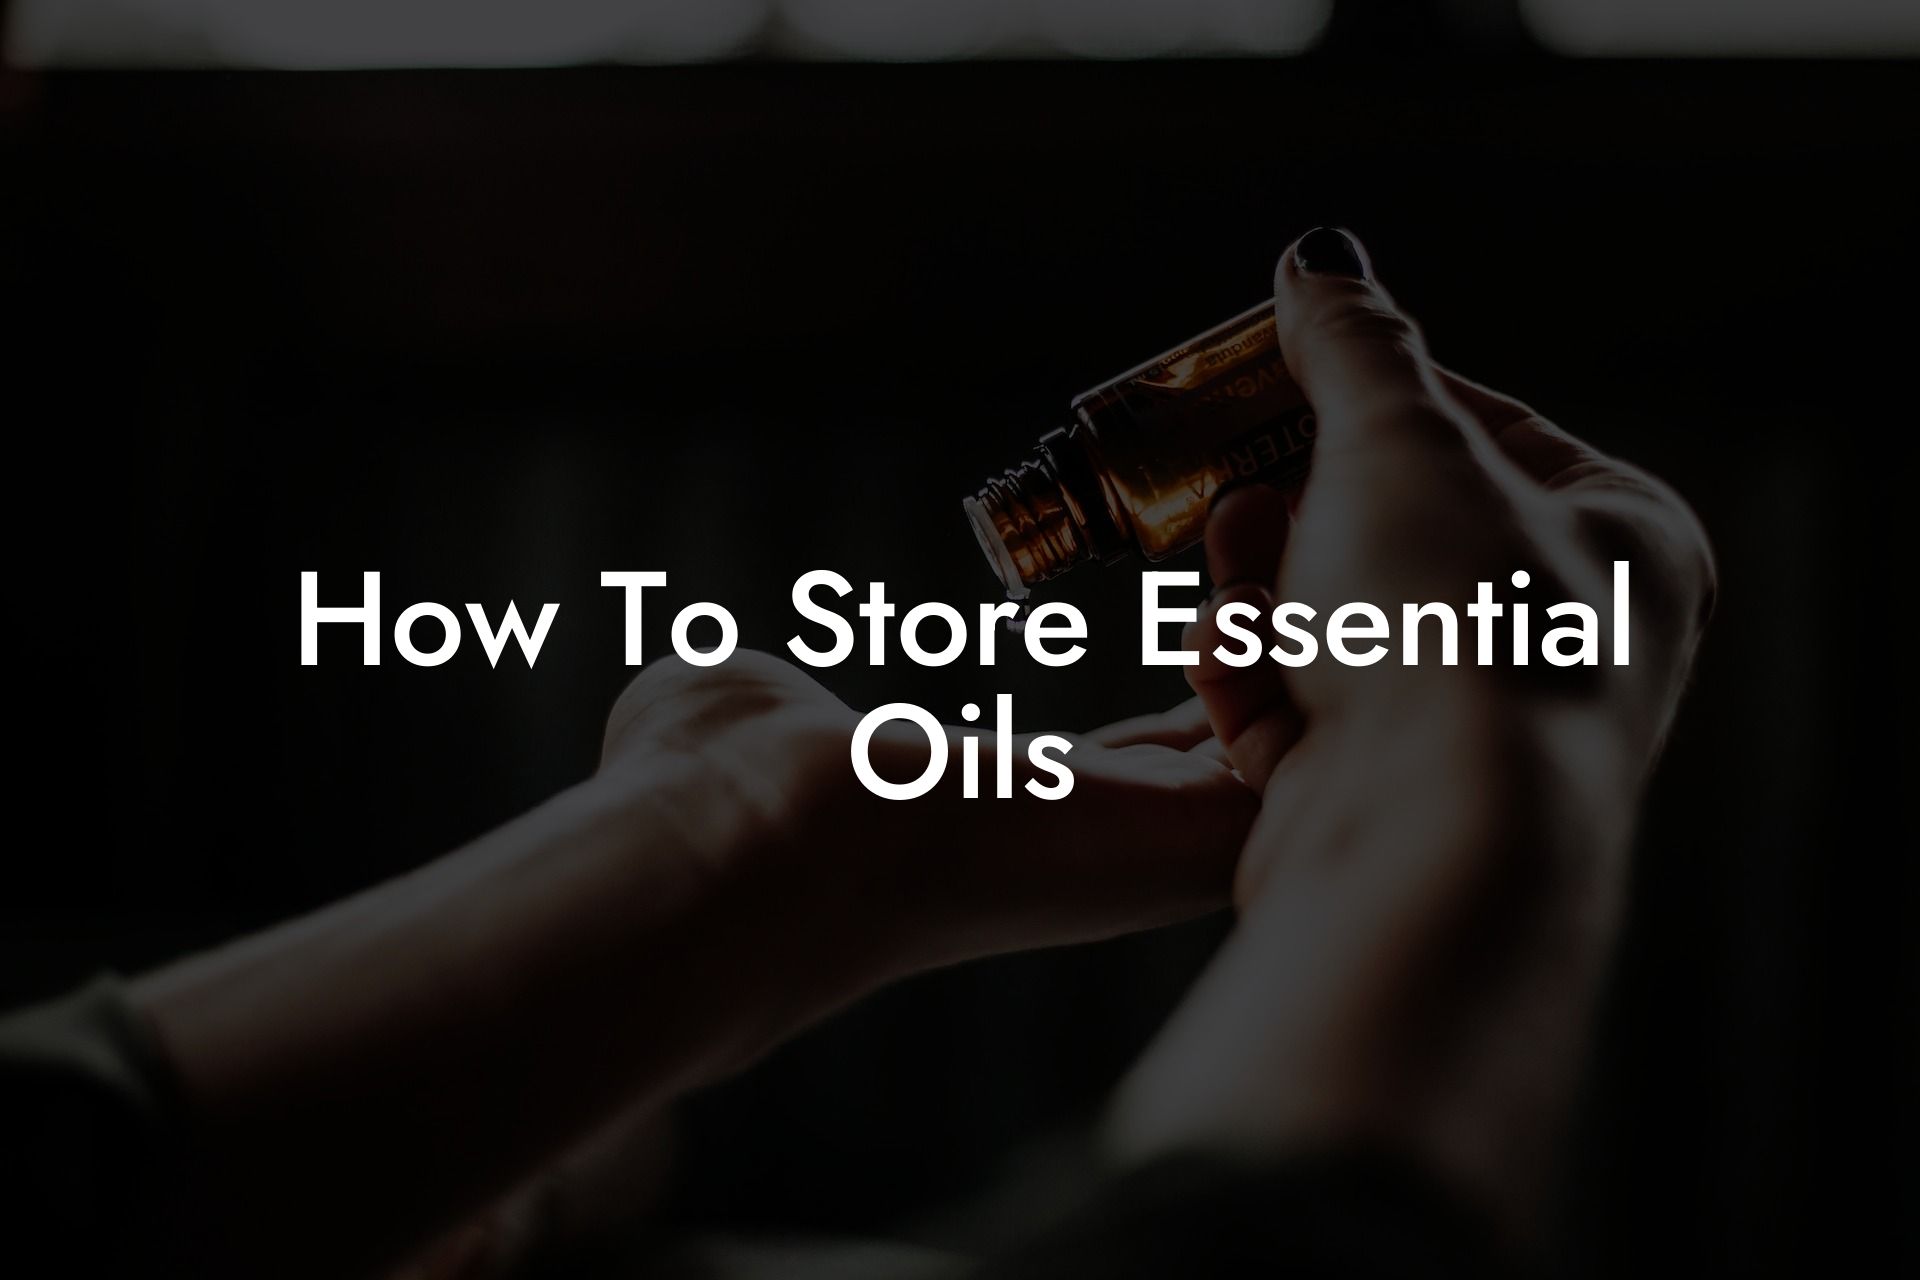 How To Store Essential Oils